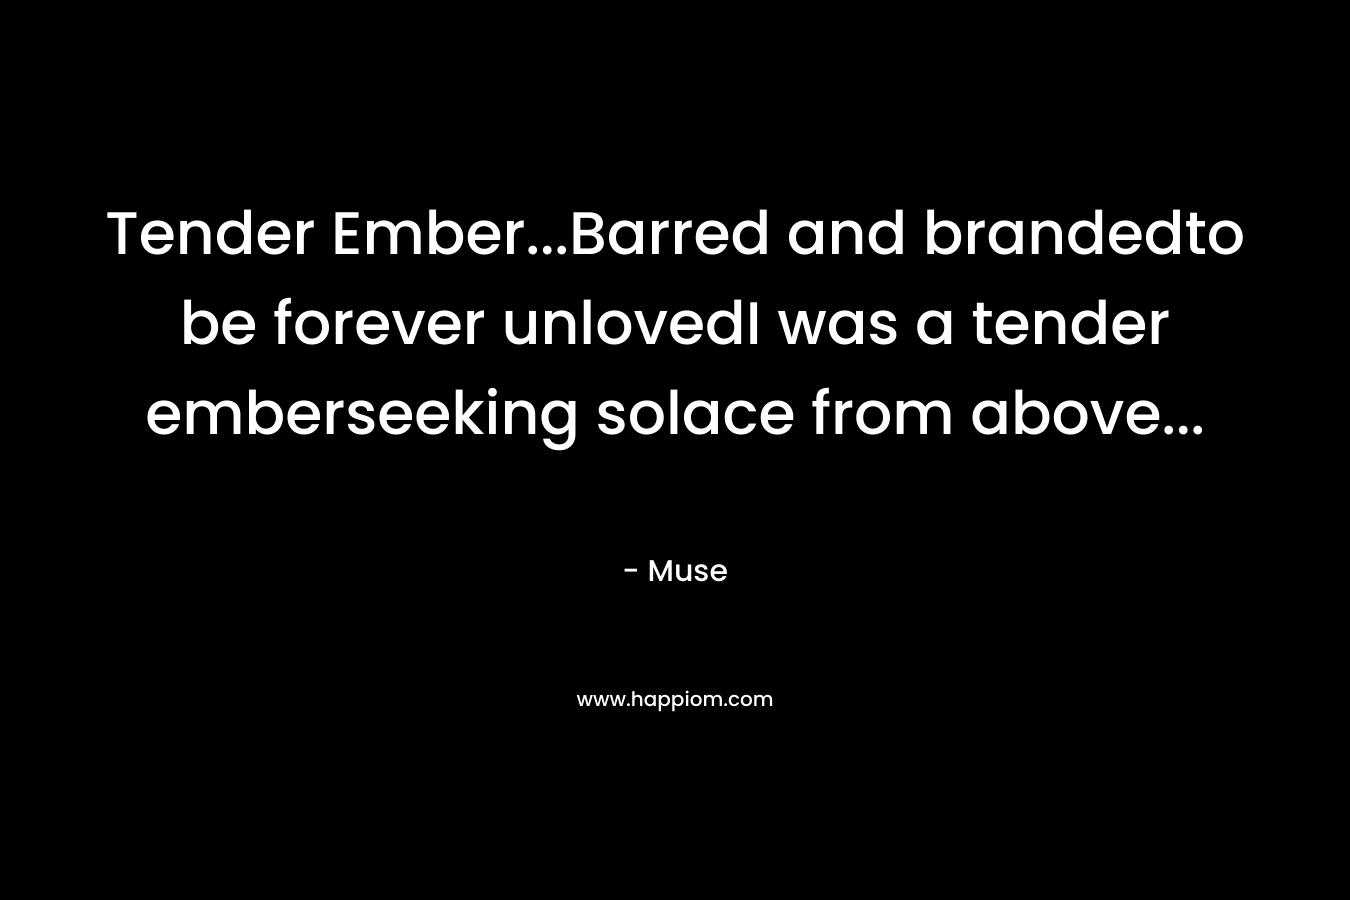 Tender Ember...Barred and brandedto be forever unlovedI was a tender emberseeking solace from above...